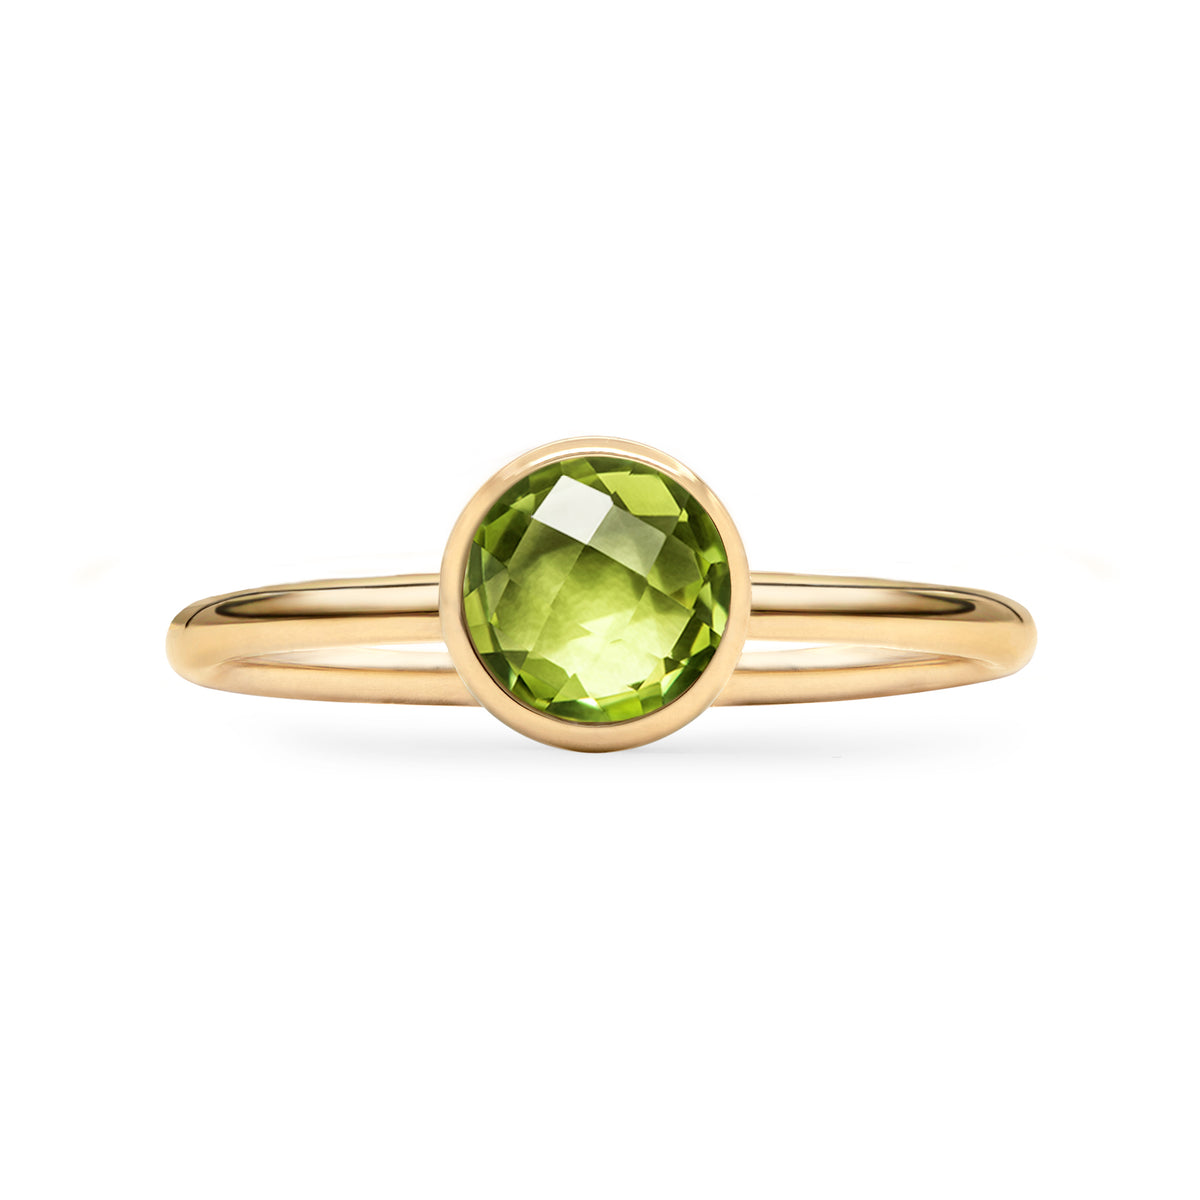 Grand Ring 14k in (August) Peridot Gold